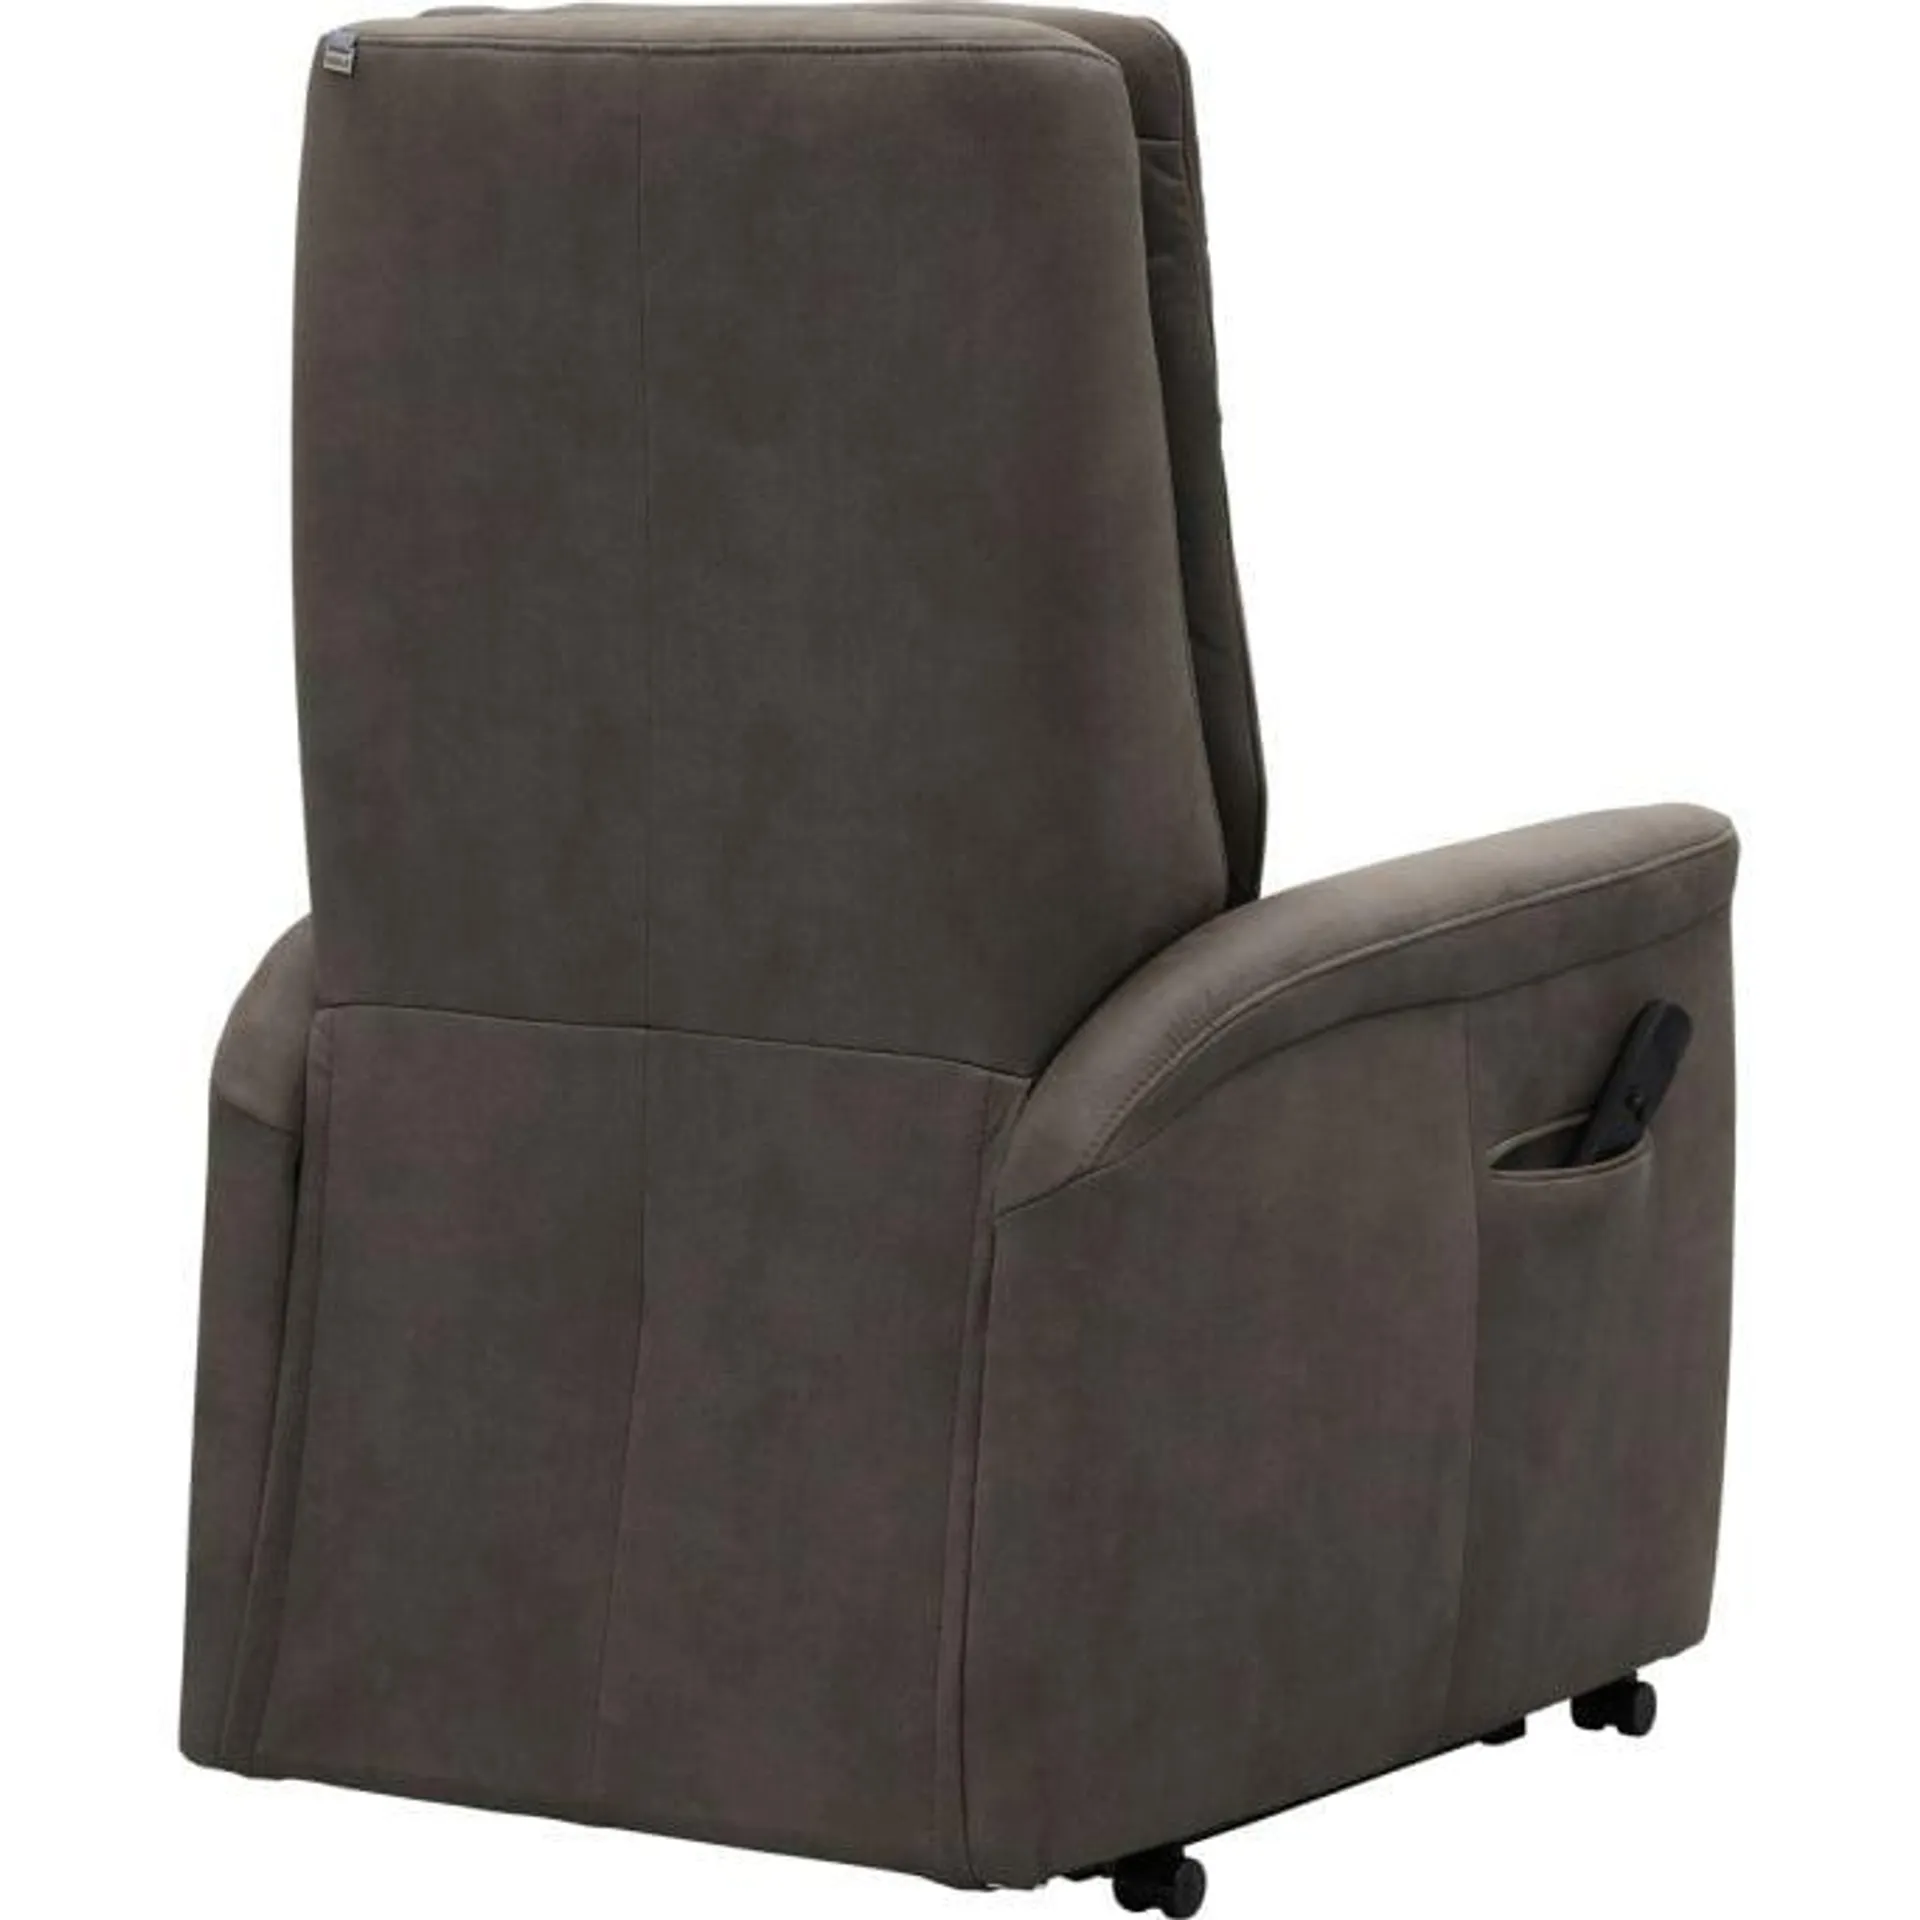 Relaxfauteuil Bas Small